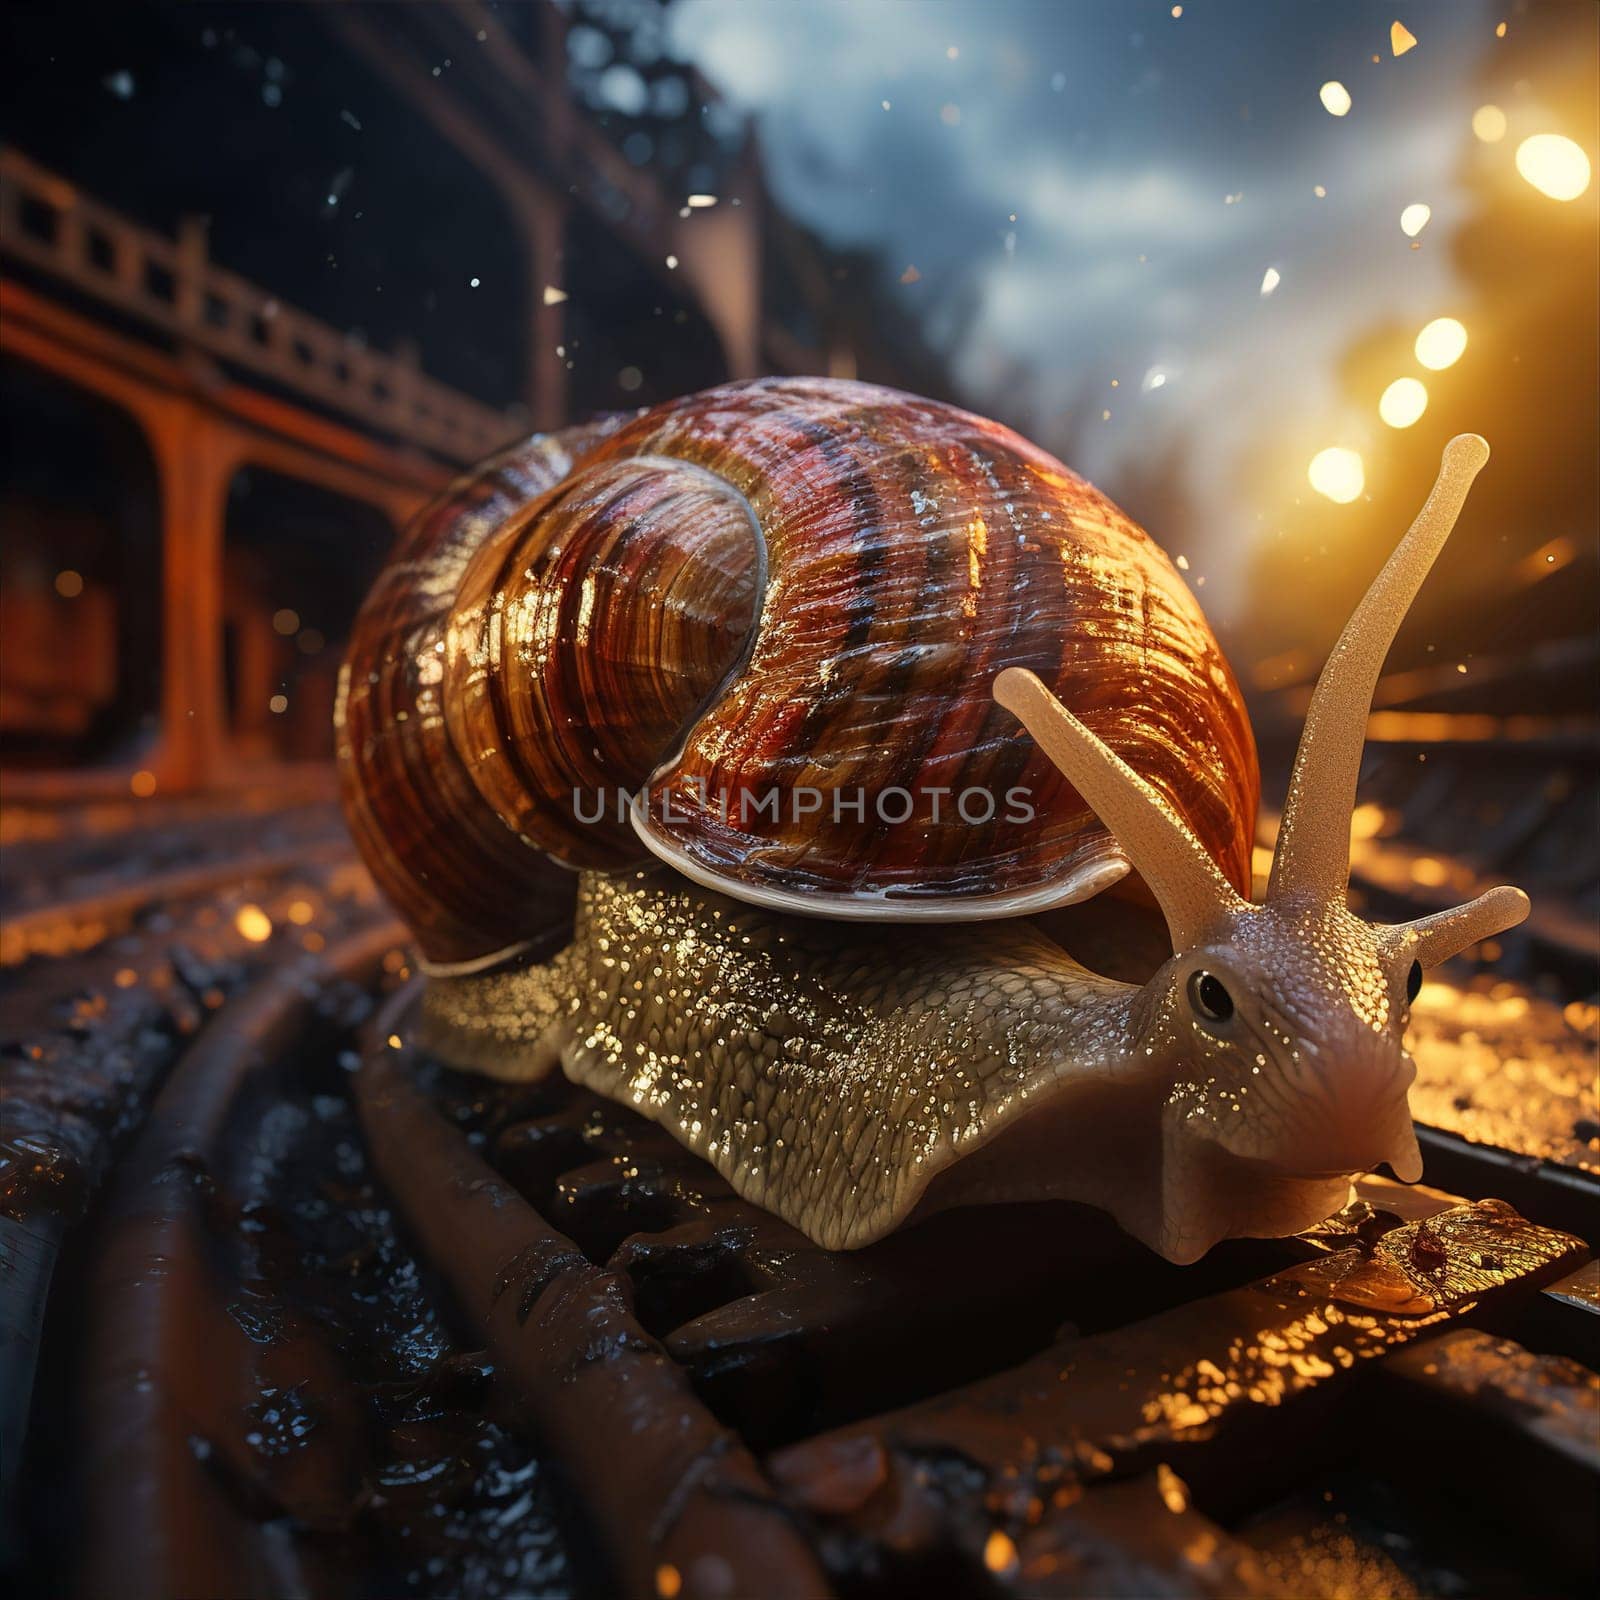 Mutant snail in shape of train with many horns slowly crawling along rails by kuprevich